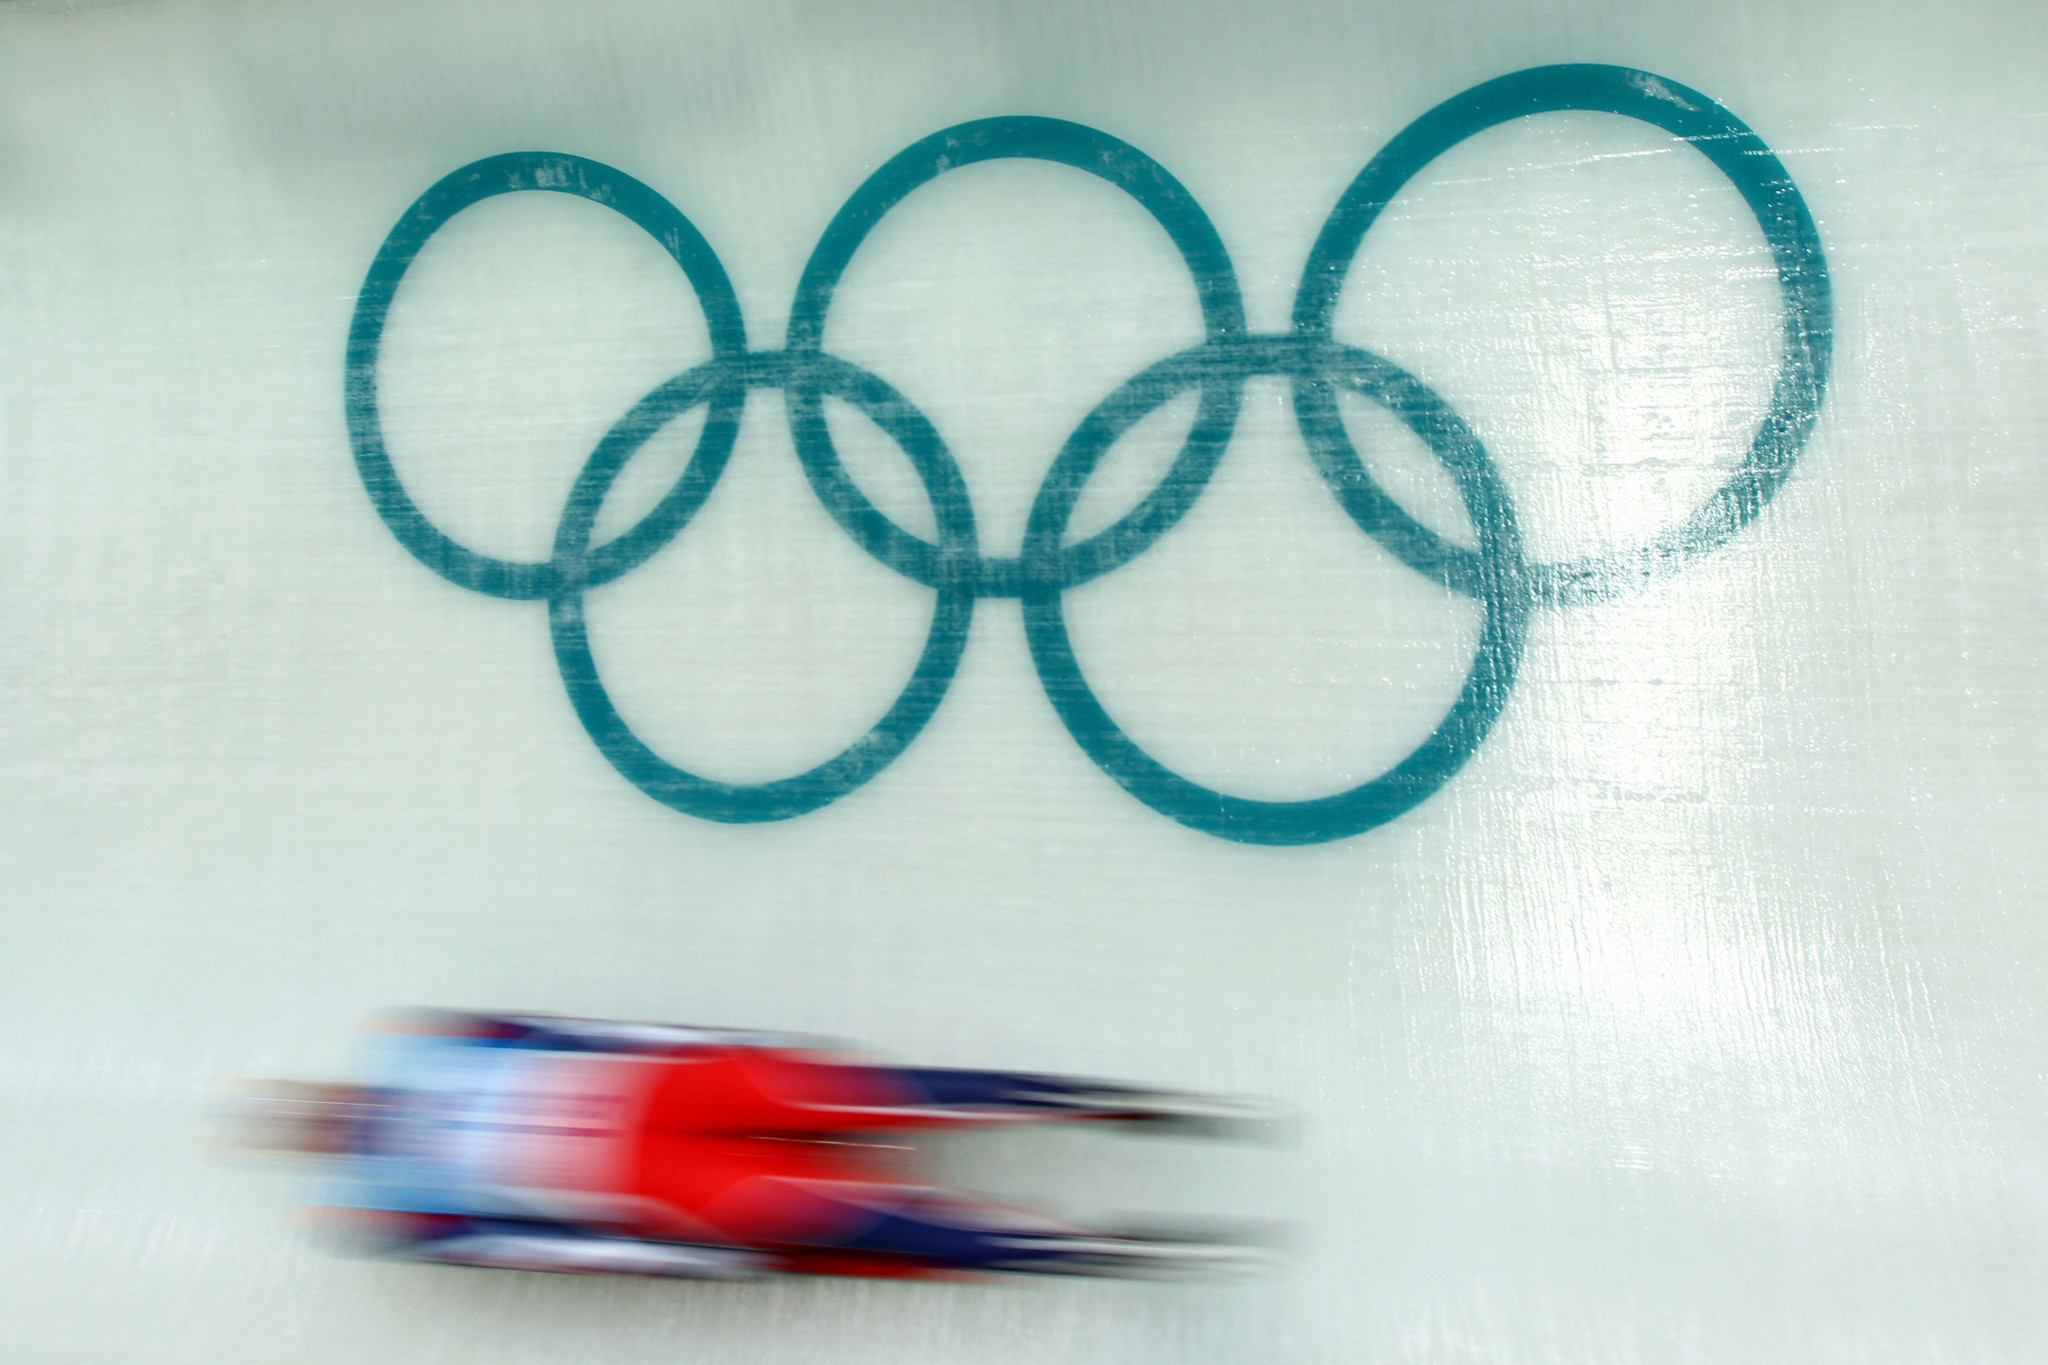 Reaching agreement over refurbishment of Olympic sliding venue among "absolute priorities" of Italian Government